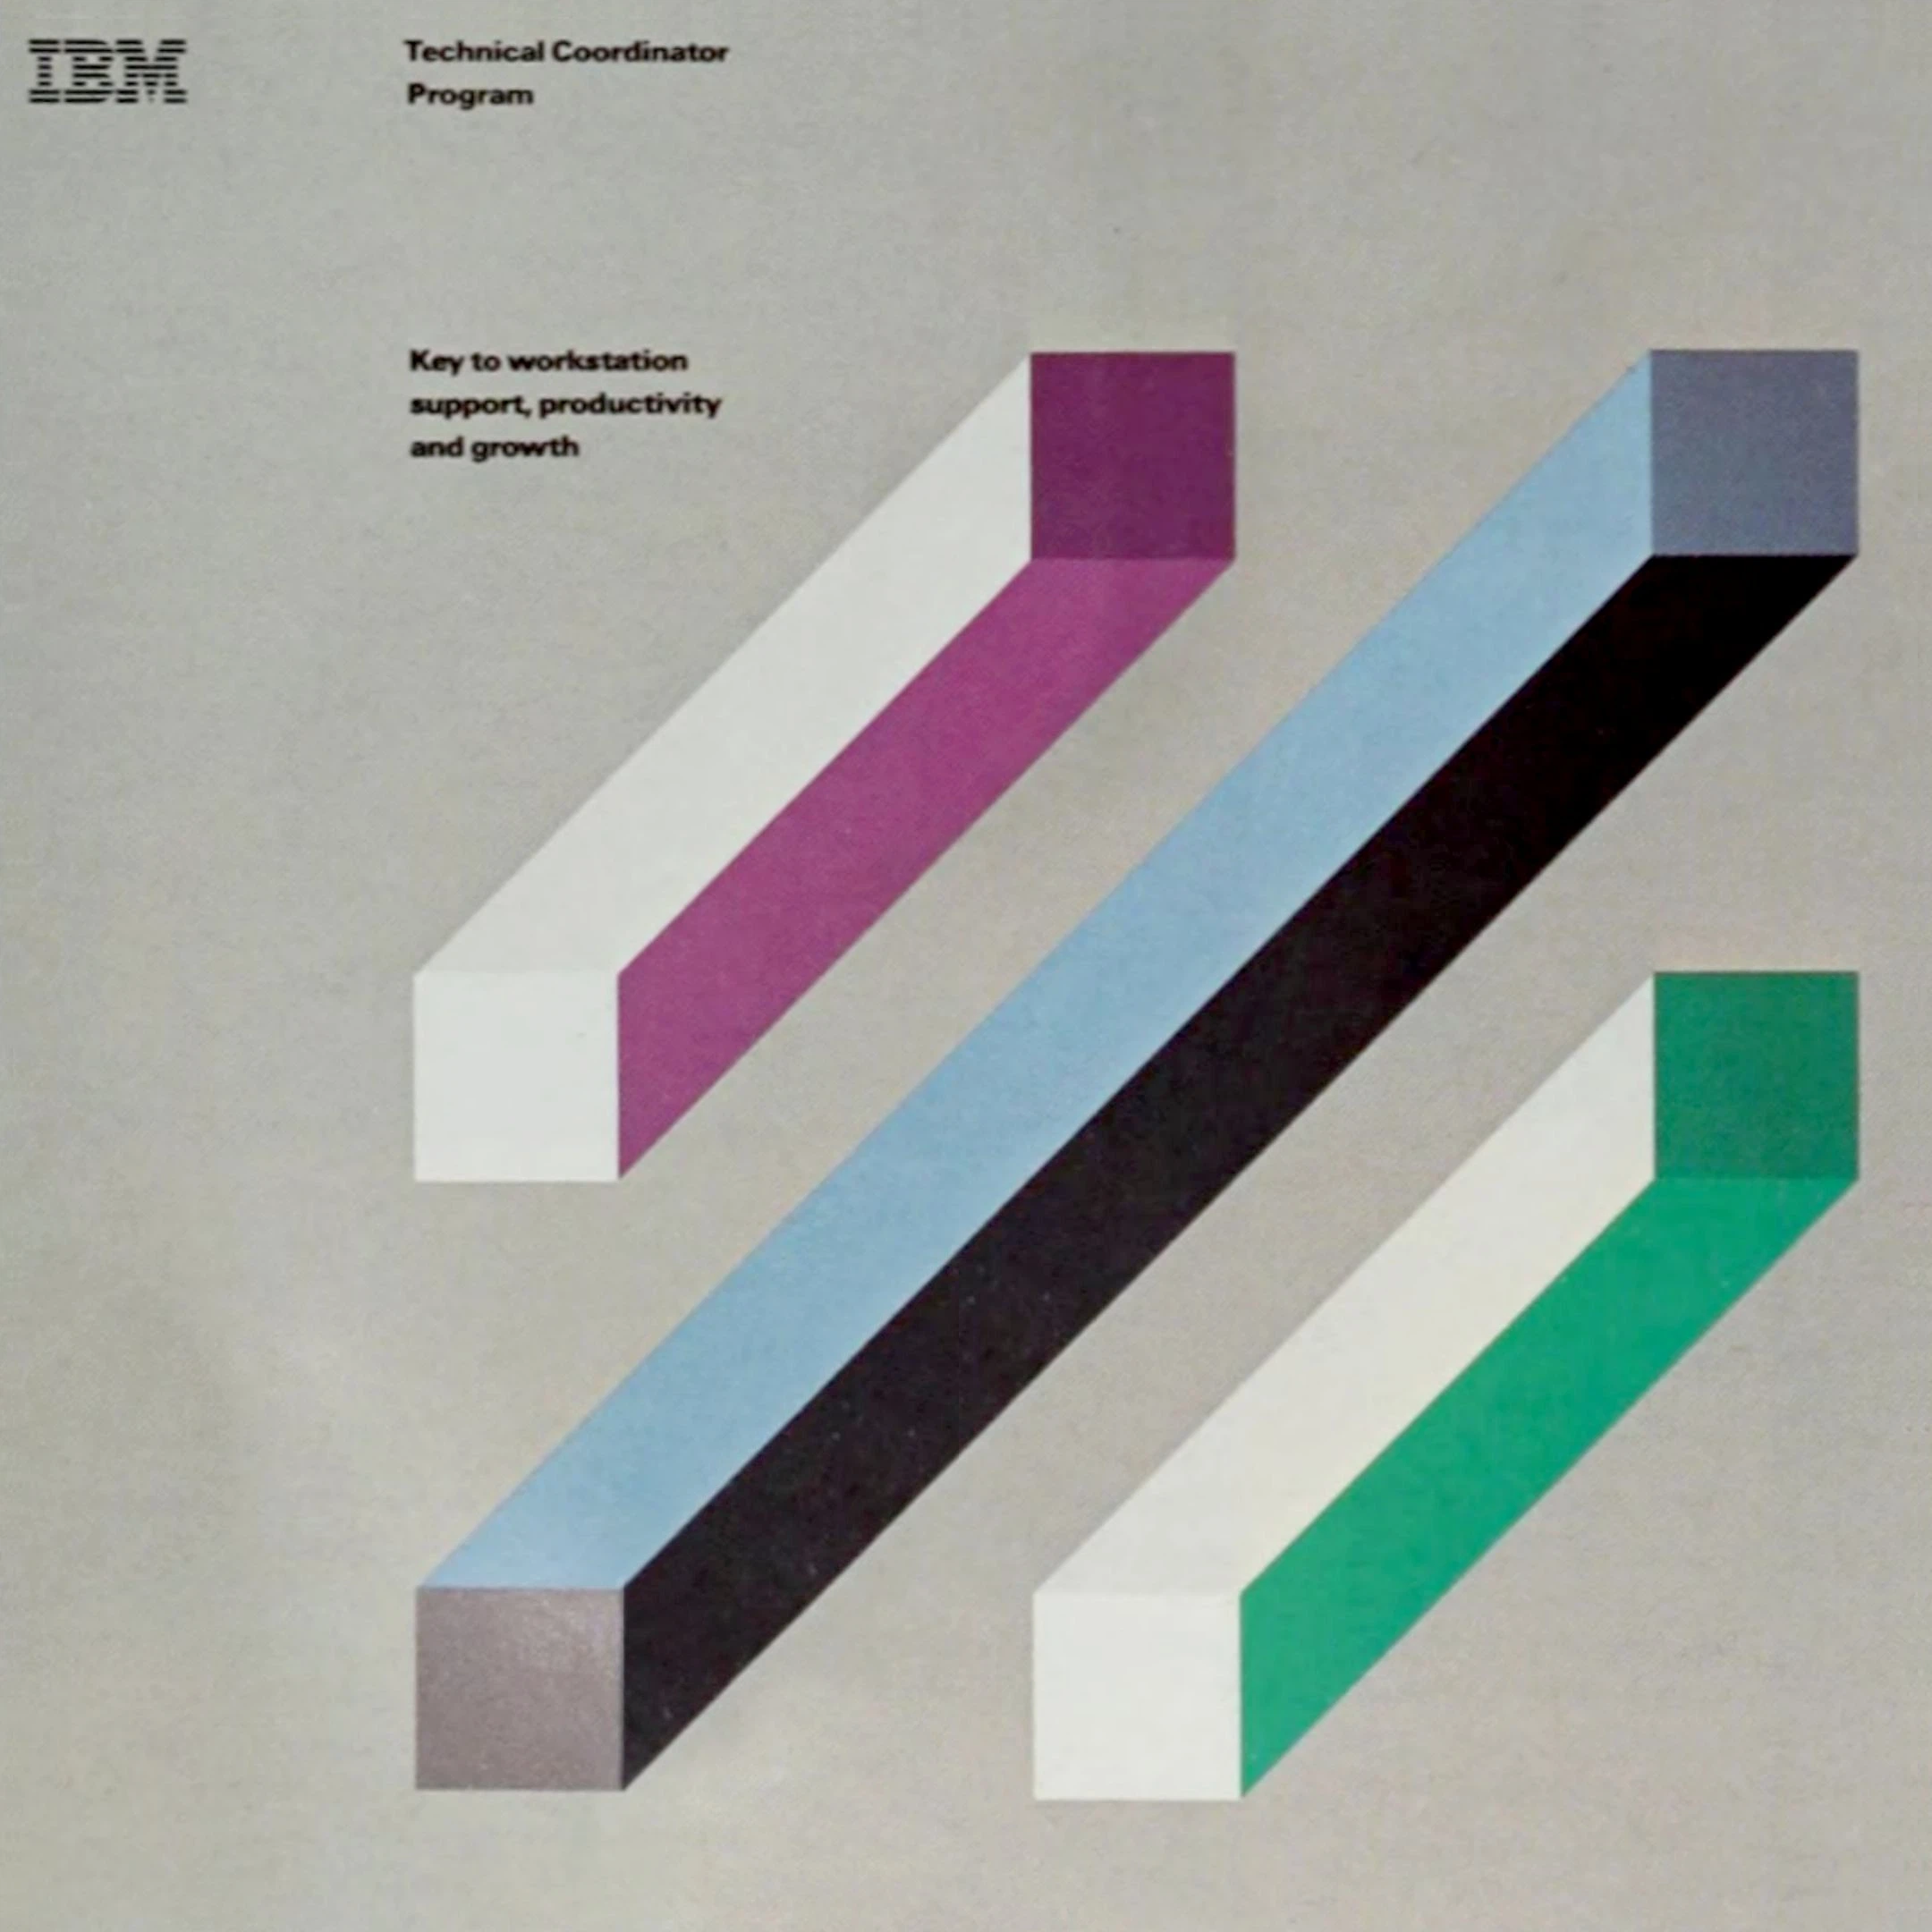 A cover of "Ideas on Design" cluster. The owner is davidmendes. The cluster consists of 3 elements.